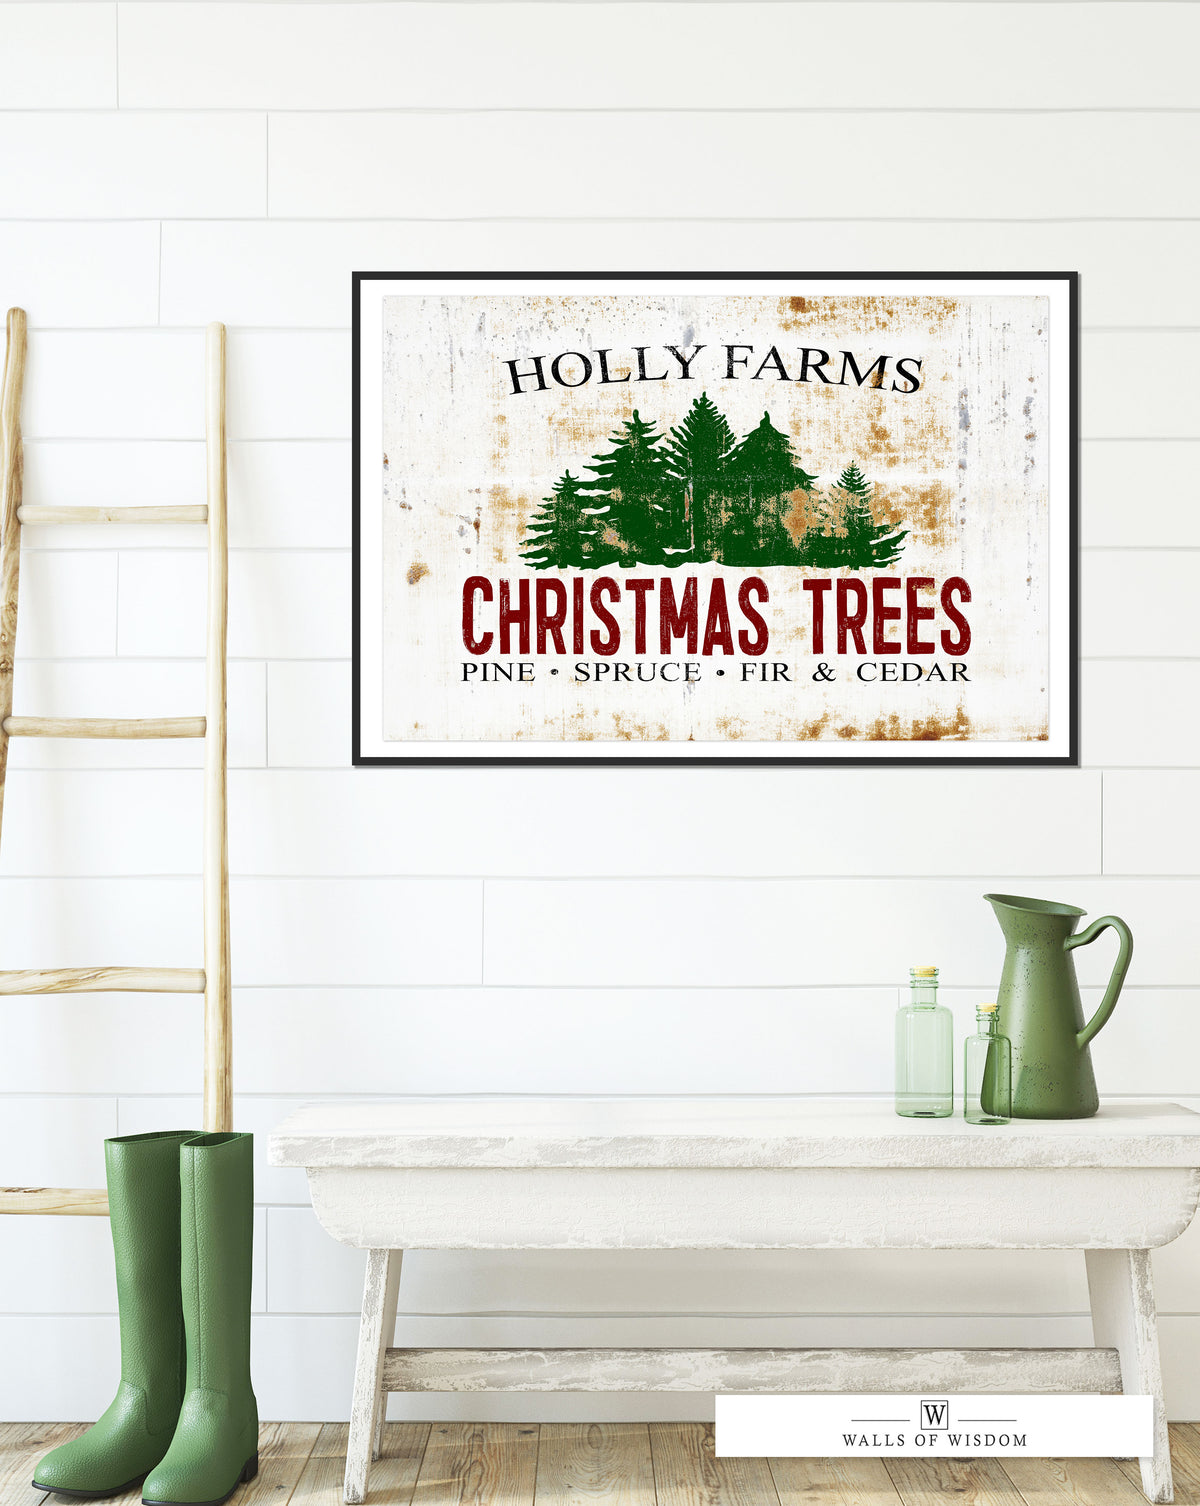 Holly Farms Vintage Christmas Tree Poster: Nostalgic Festive Wall Art for Cozy, Rustic Homes